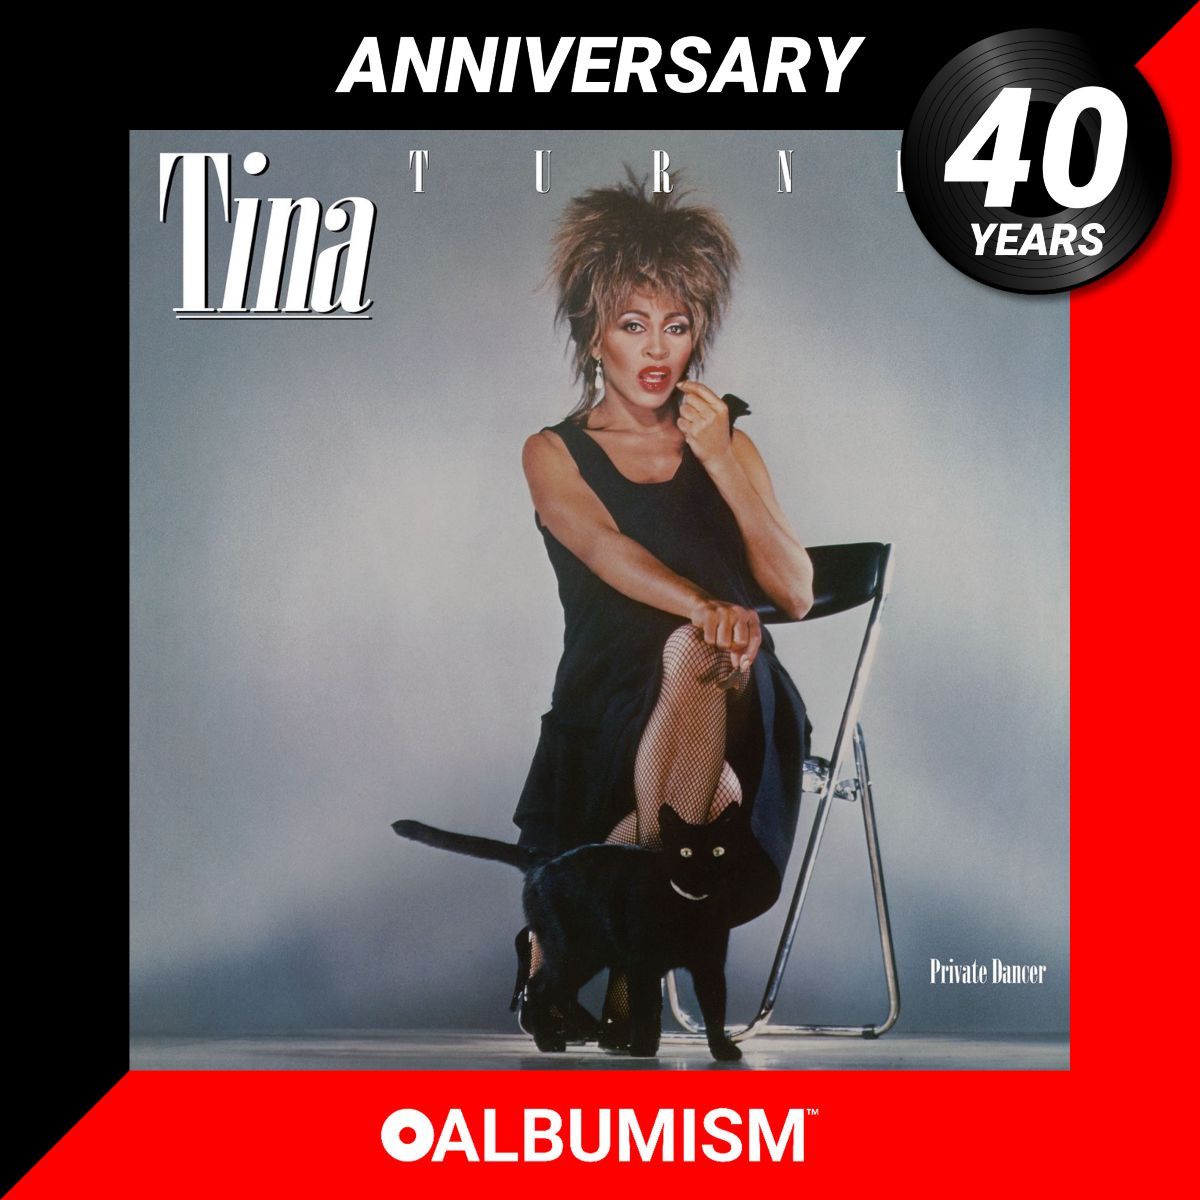 Happy 40th Anniversary to #TinaTurner's fifth solo studio album ‘Private Dancer’ originally released May 29, 1984 | Read our tribute by @BeyondTheEncore + listen to the album here: album.ink/tinaturnerPD @tinaturner